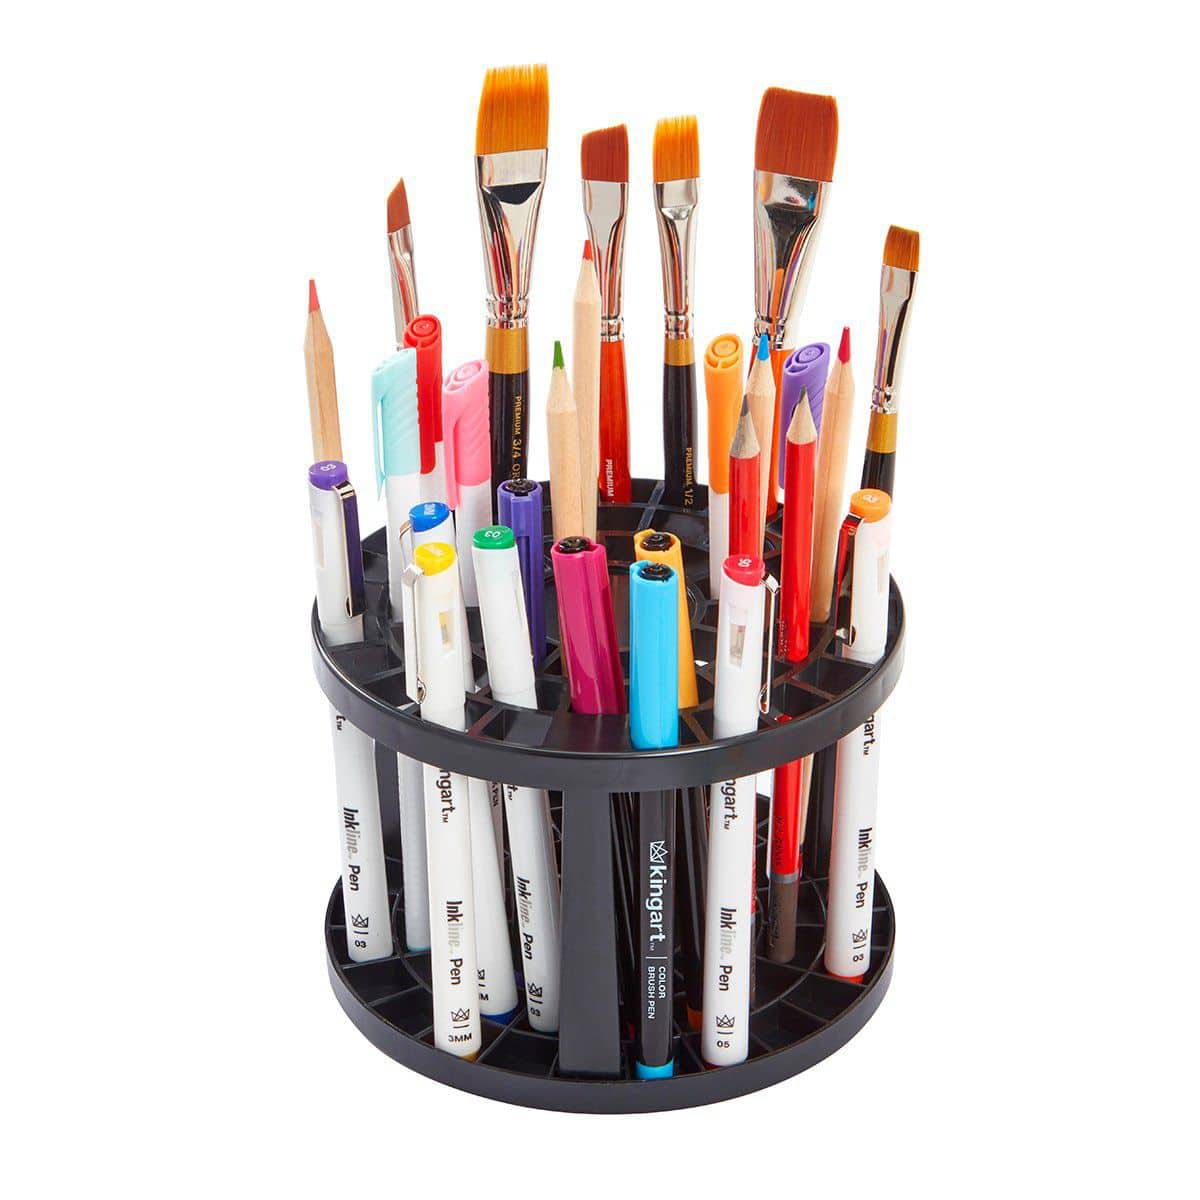 SUCOOL 49 Hole Pencil Holder Paint Brush Holder and Organizer, Rotating  Desk Organizer for Paint Brushes, Makeup brush, Colored Pencils, Markers